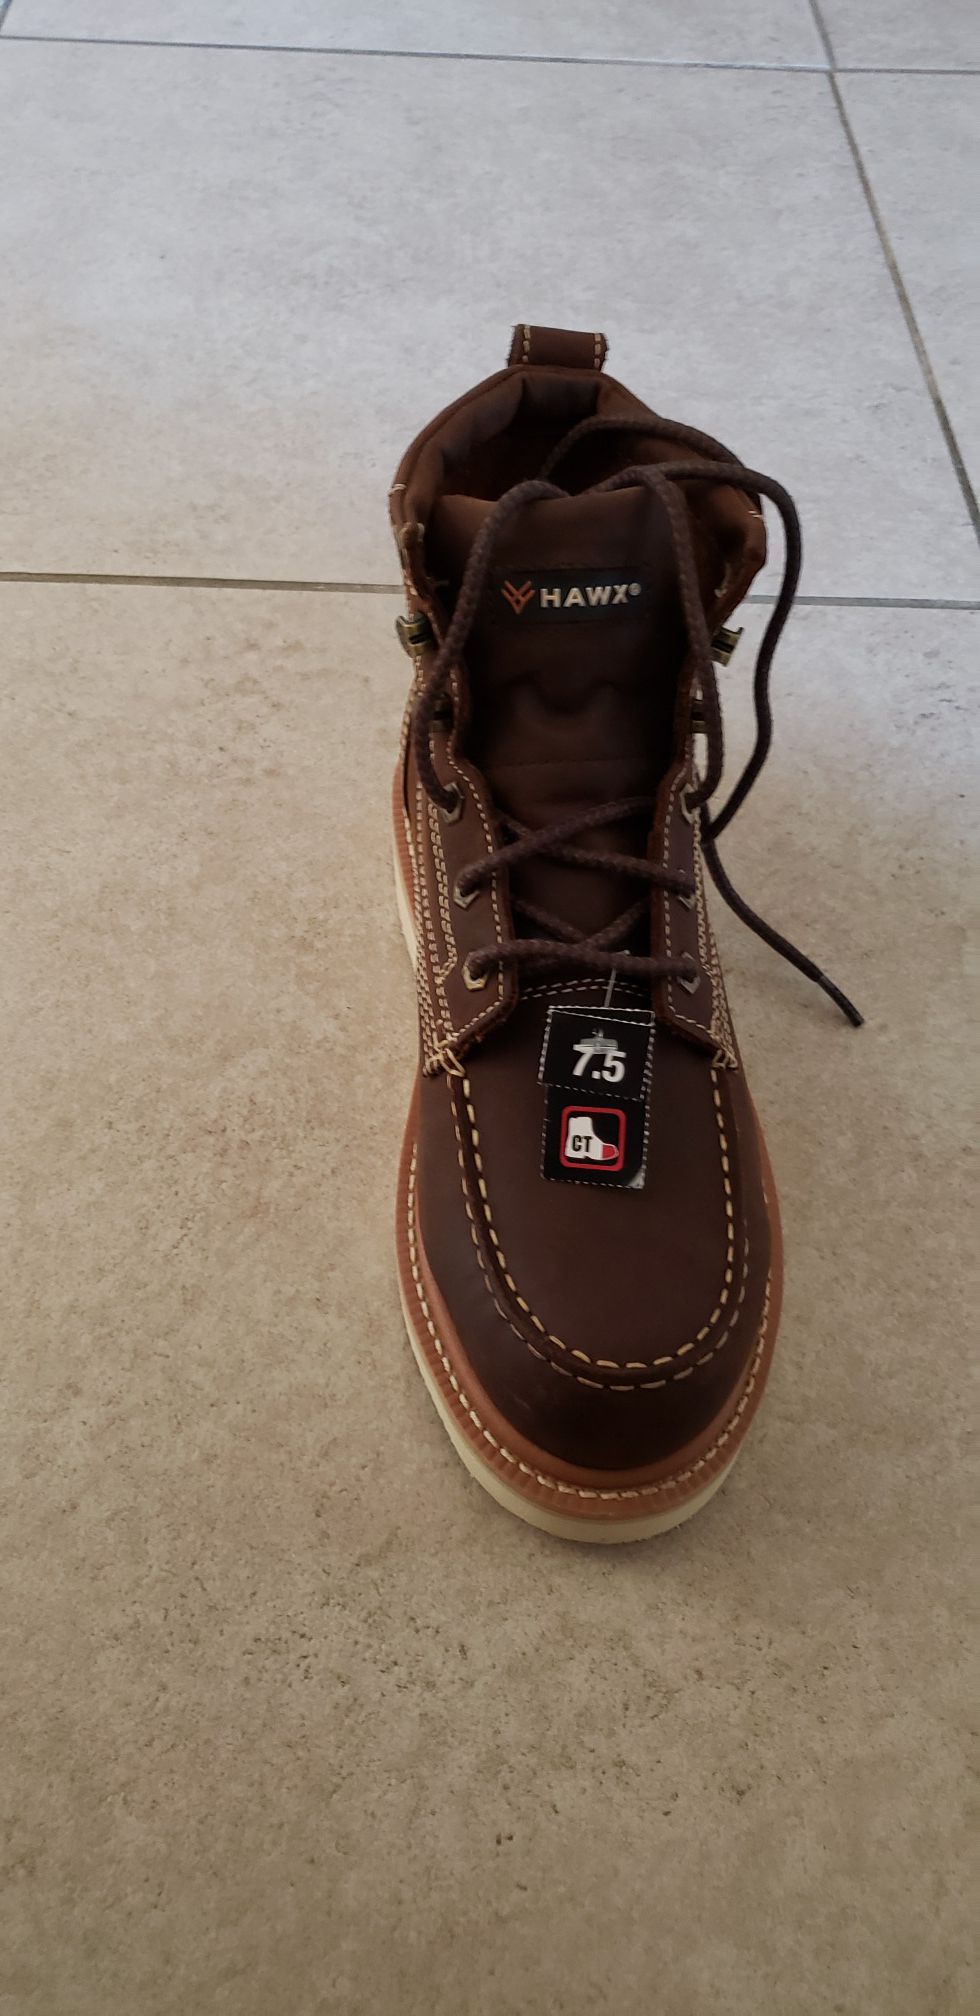 New Hawx work boots size 7.5